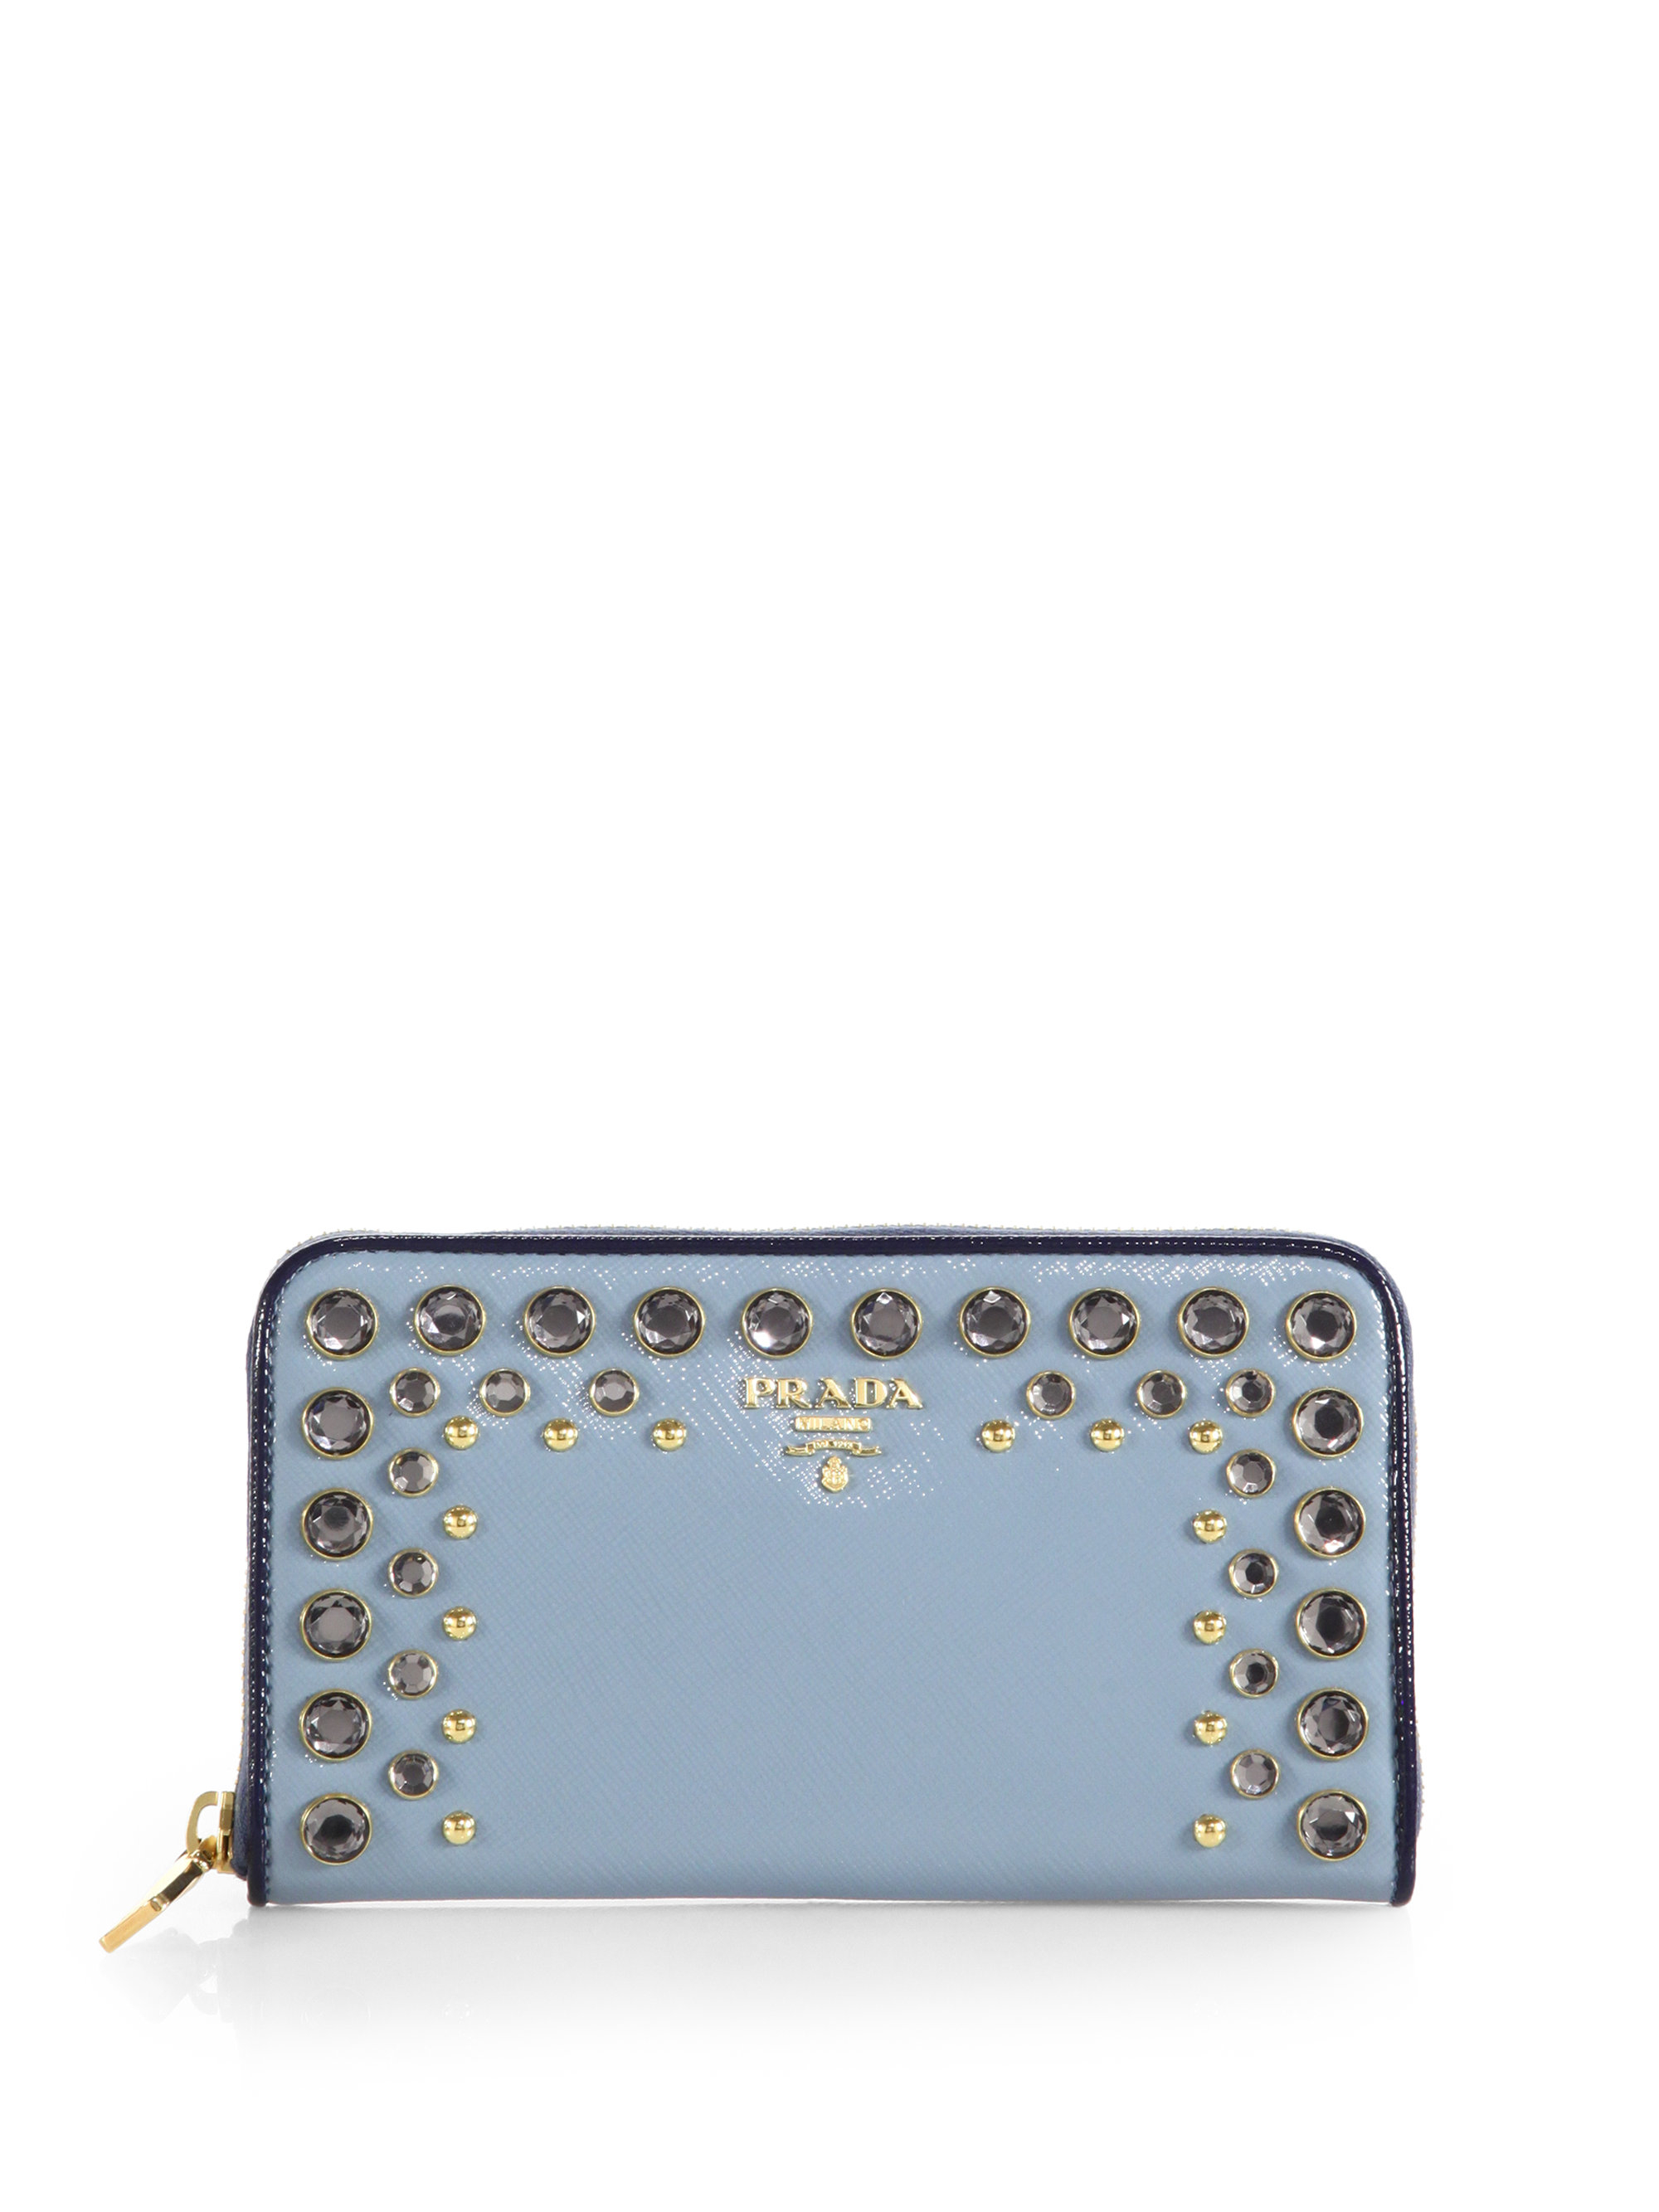 Prada Saffiano Vernice Continental Wallet with Crystal Studs in ...  